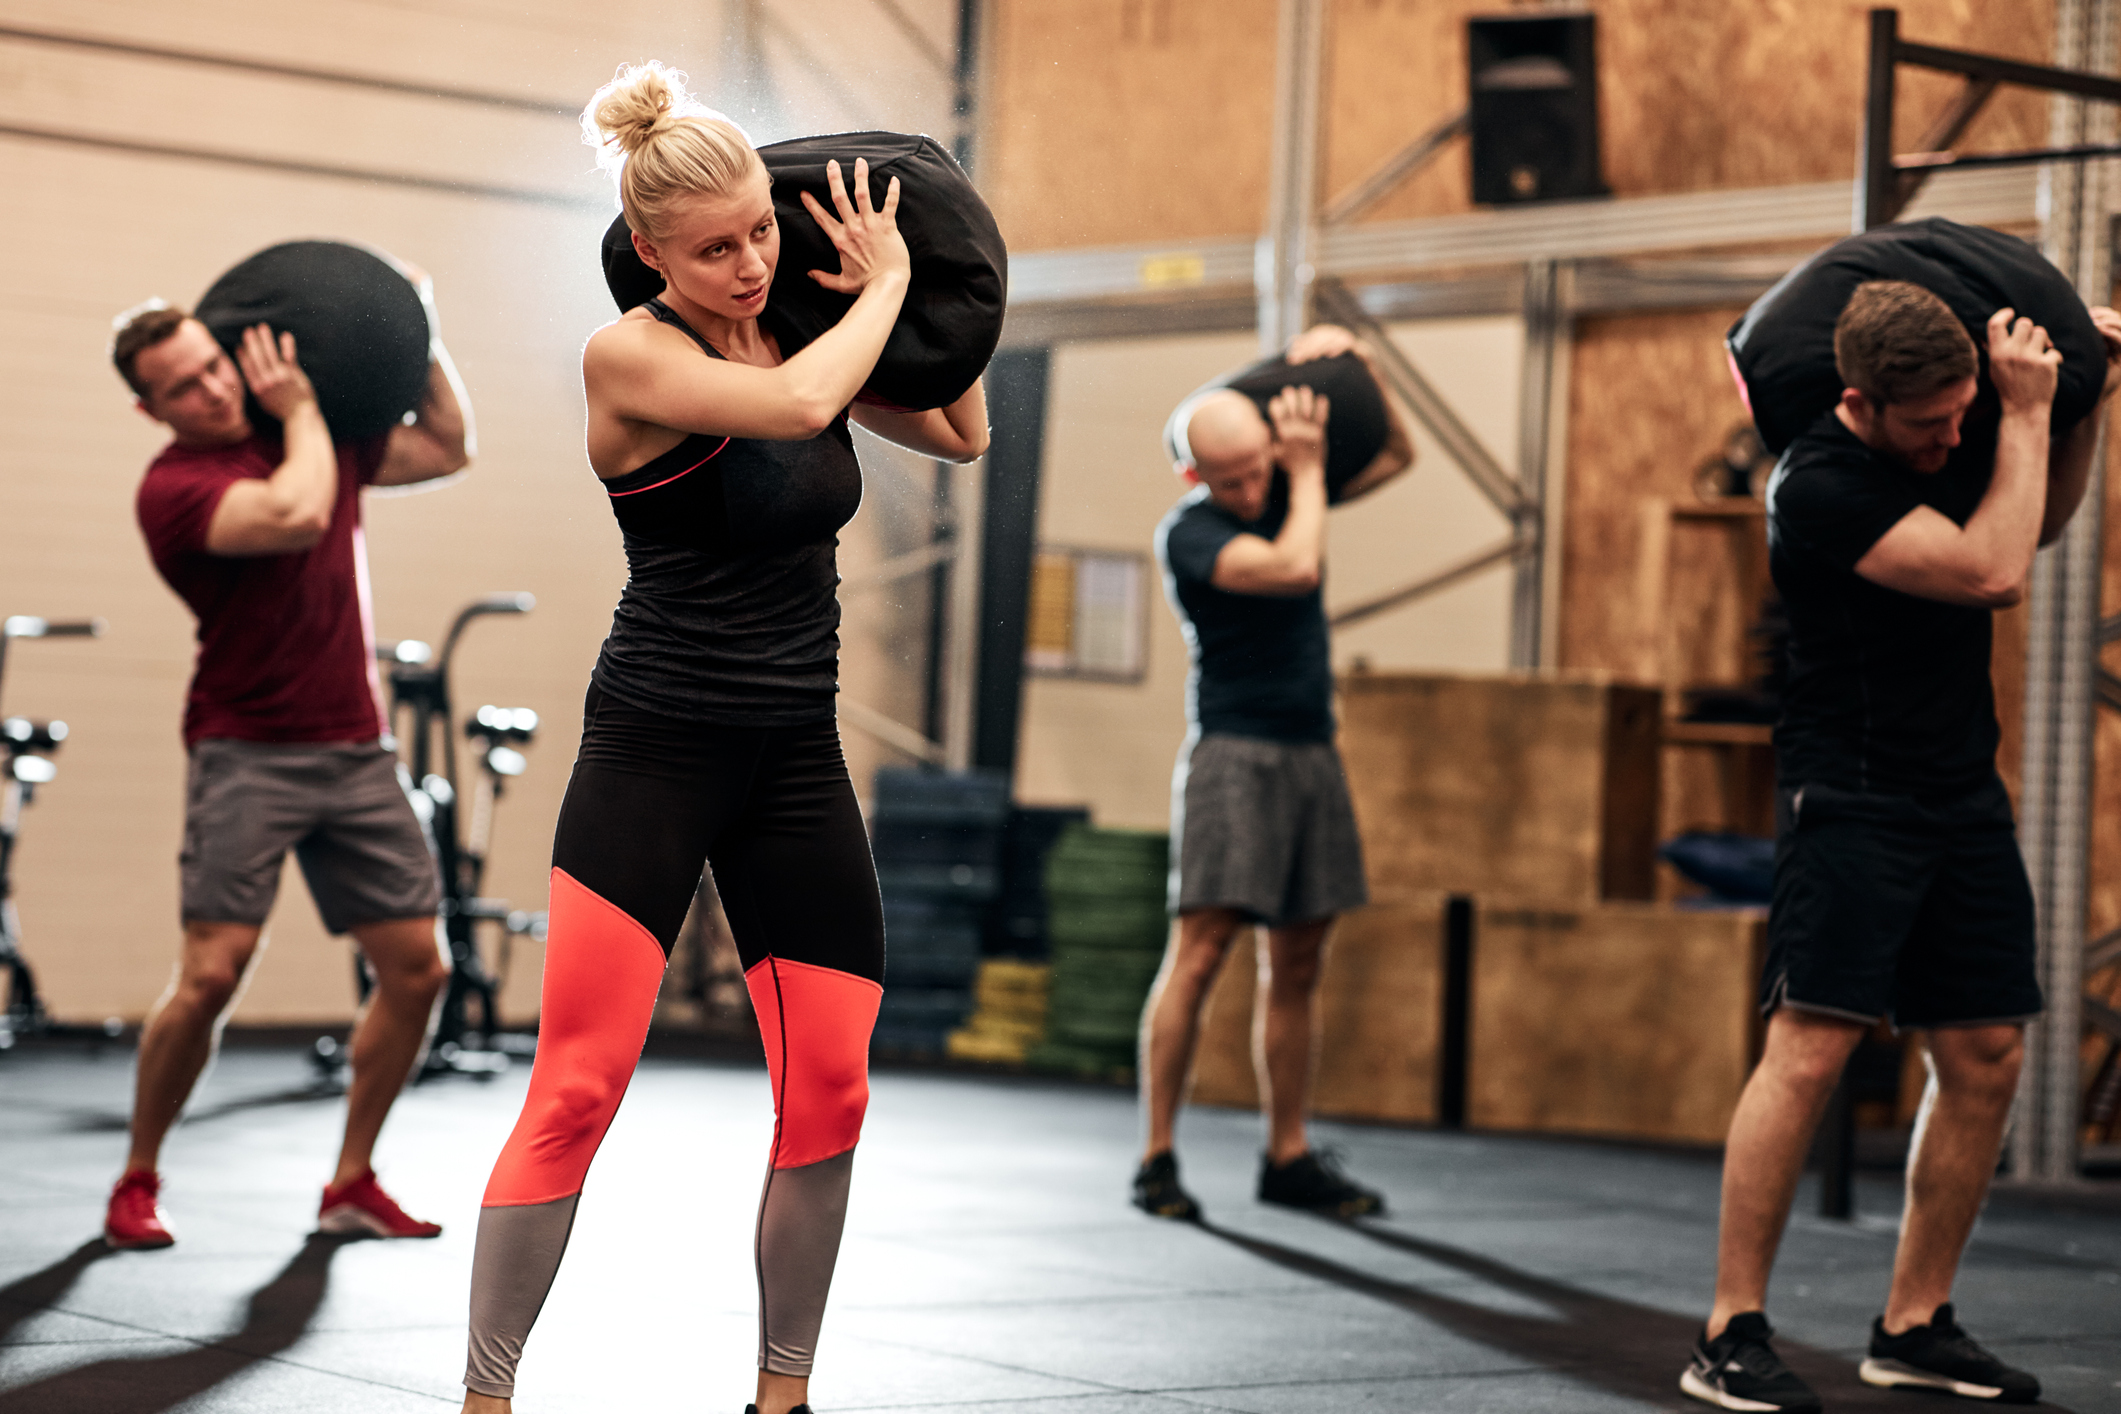 Fit group of people working out with weight bags during a strength training class in a gym